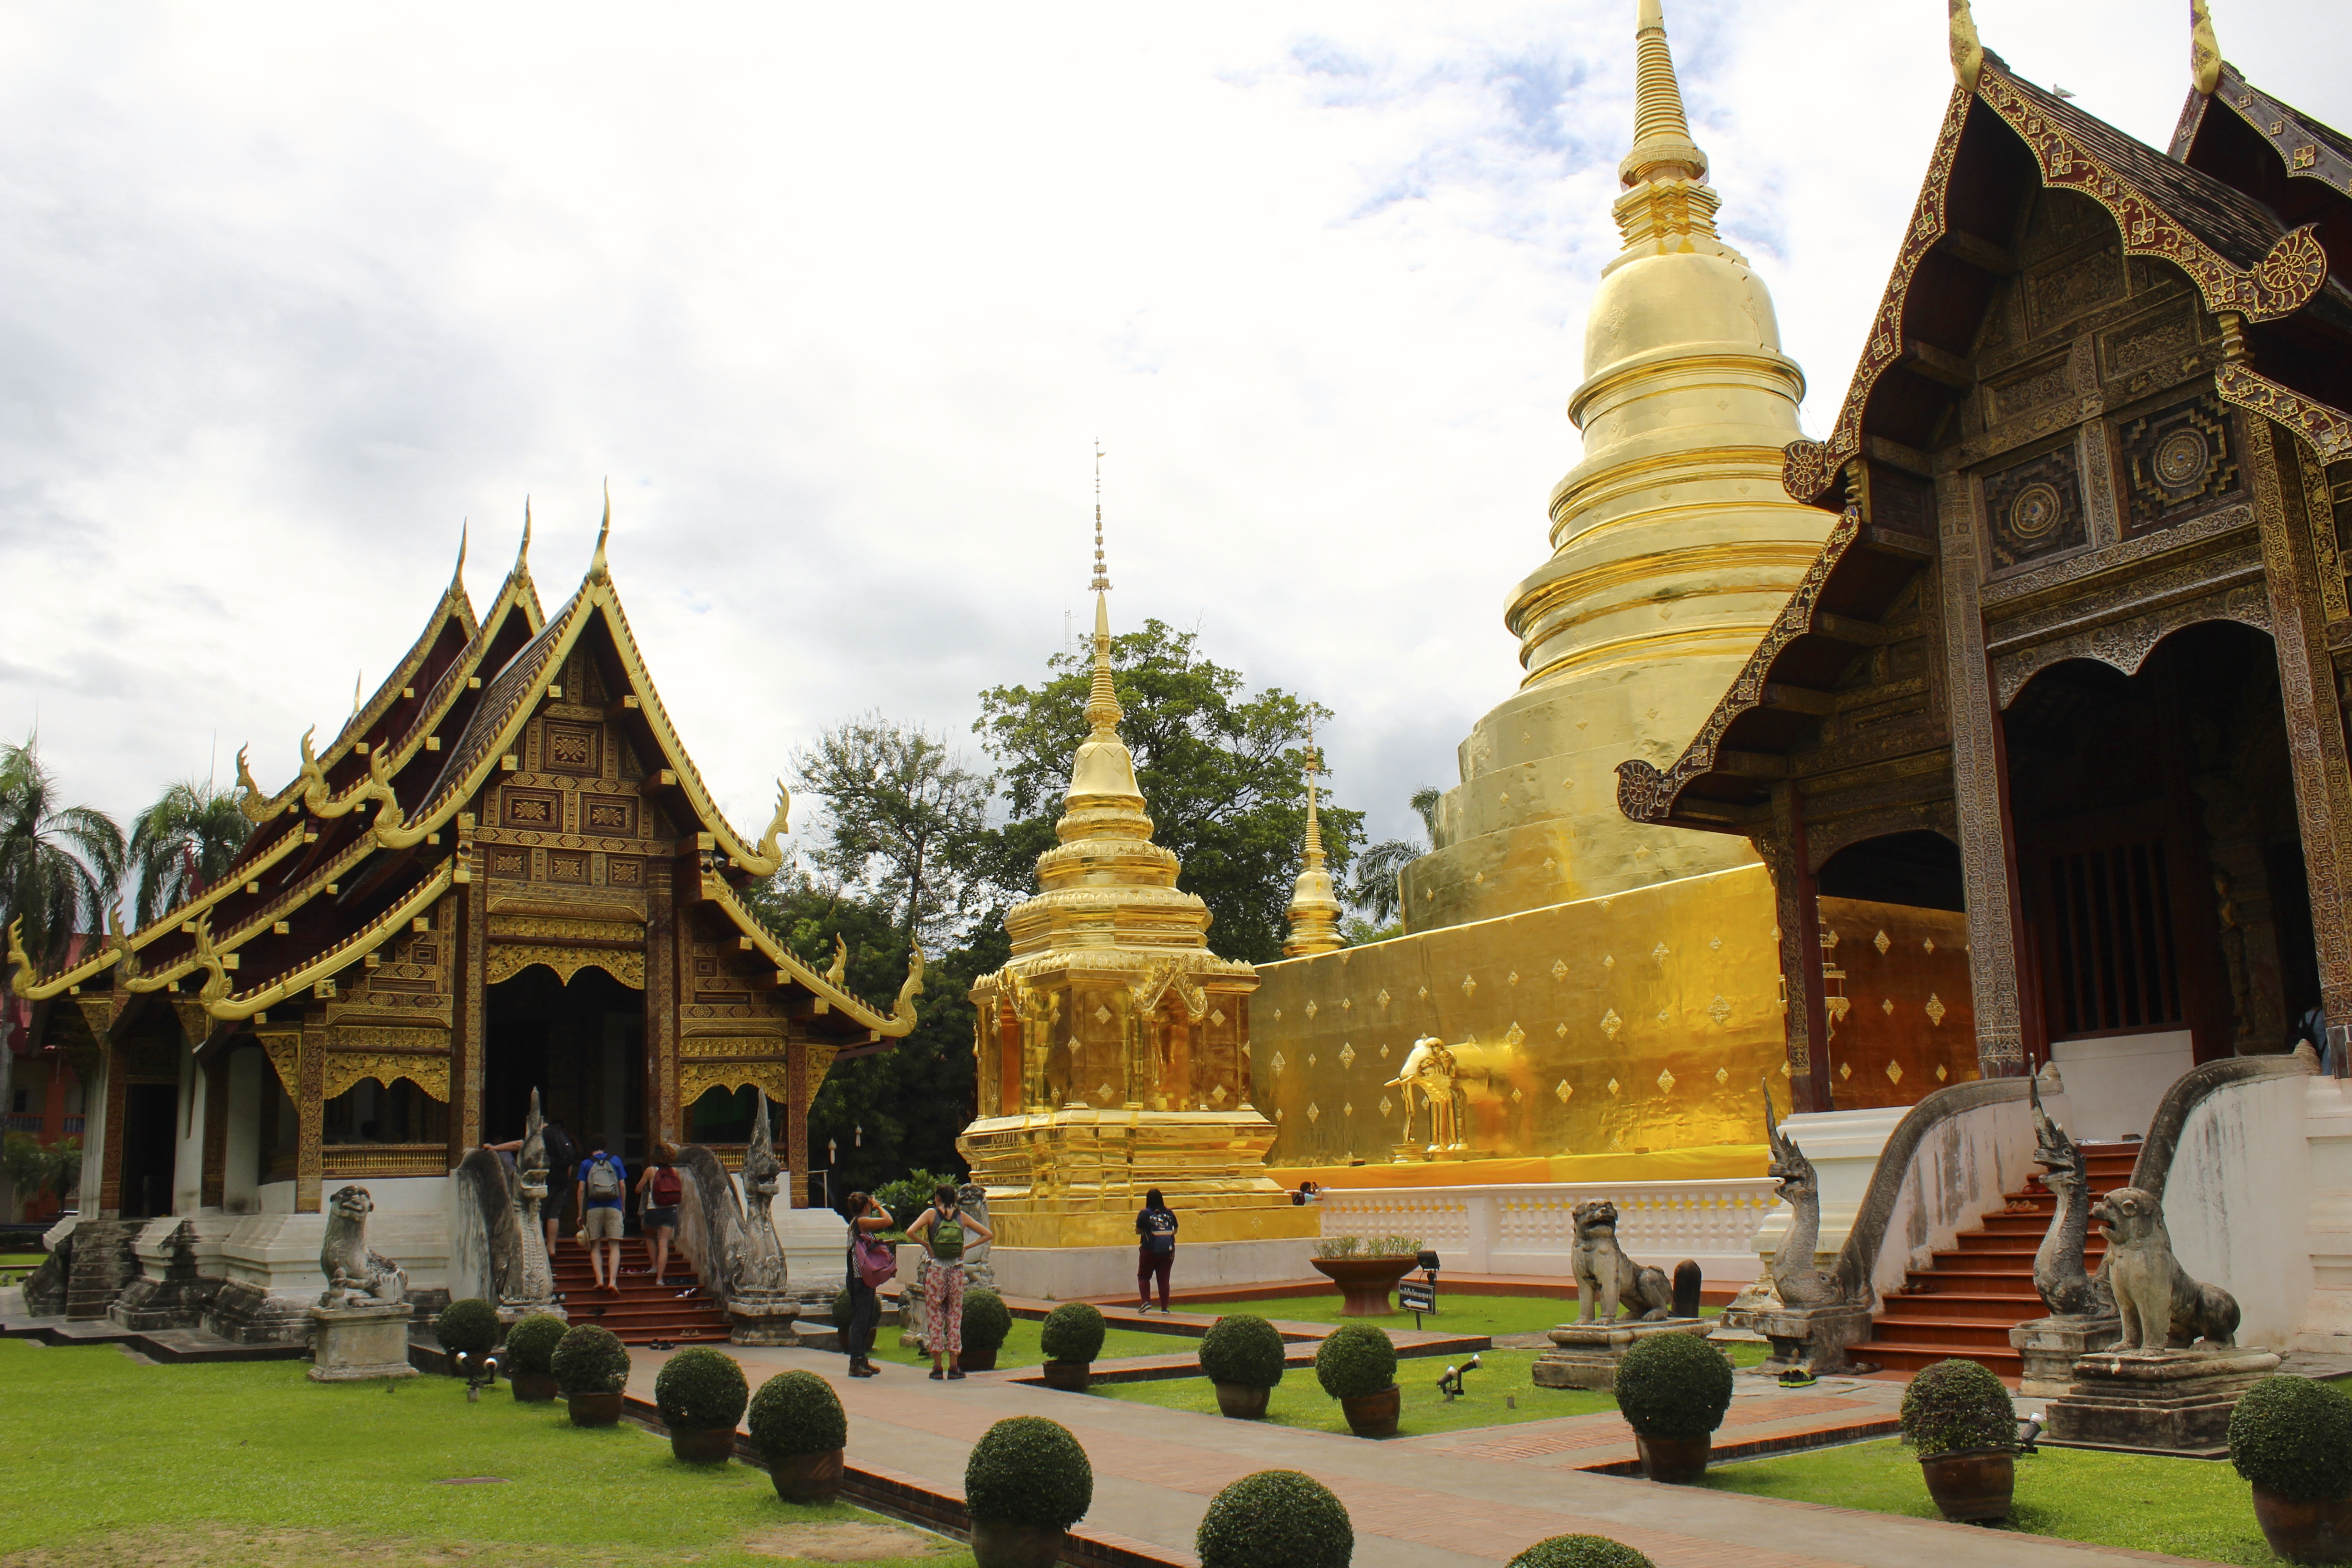 The beautiful grounds of Wat Phra Singh.